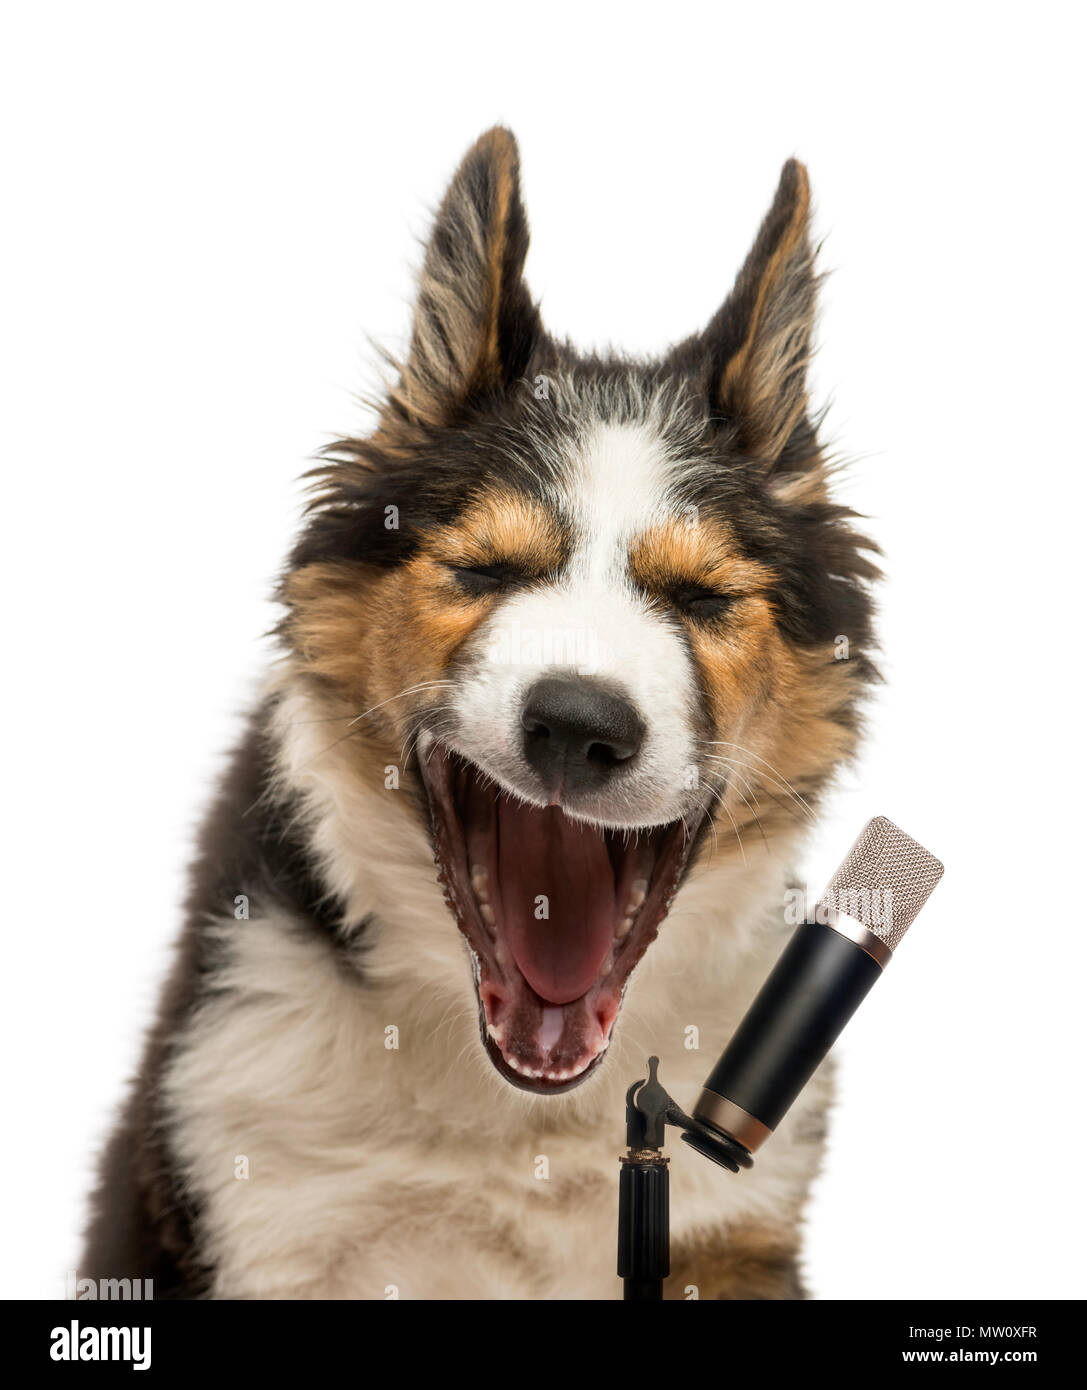 Close-up of a Border collie singing into a microphone, isolated on white Stock Photo